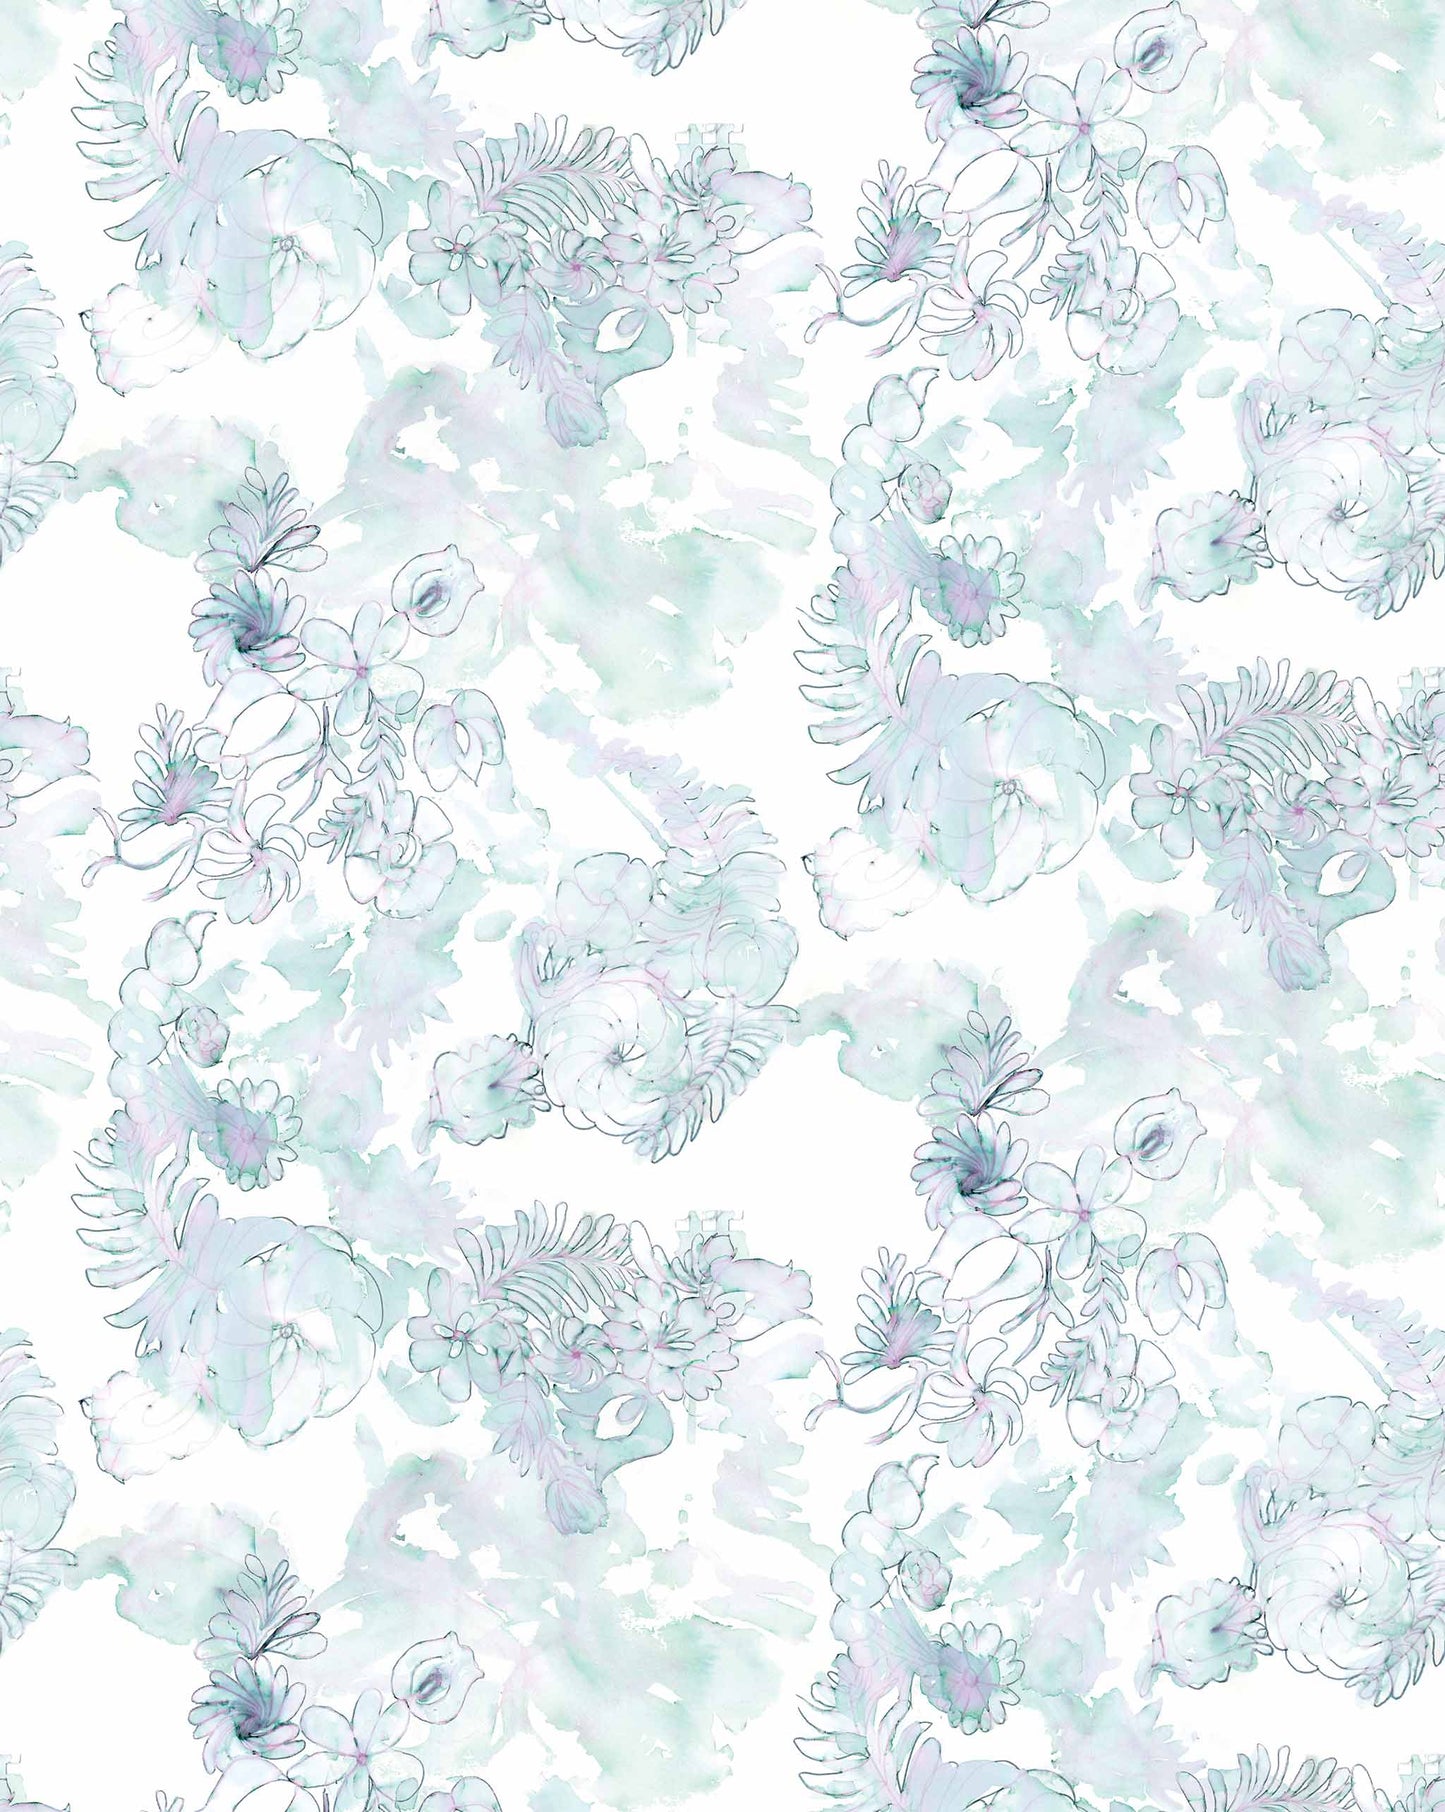 Seamless Belize Blooms Wallpaper Mural with delicate blue and green watercolor flowers on a faded watercolor background.